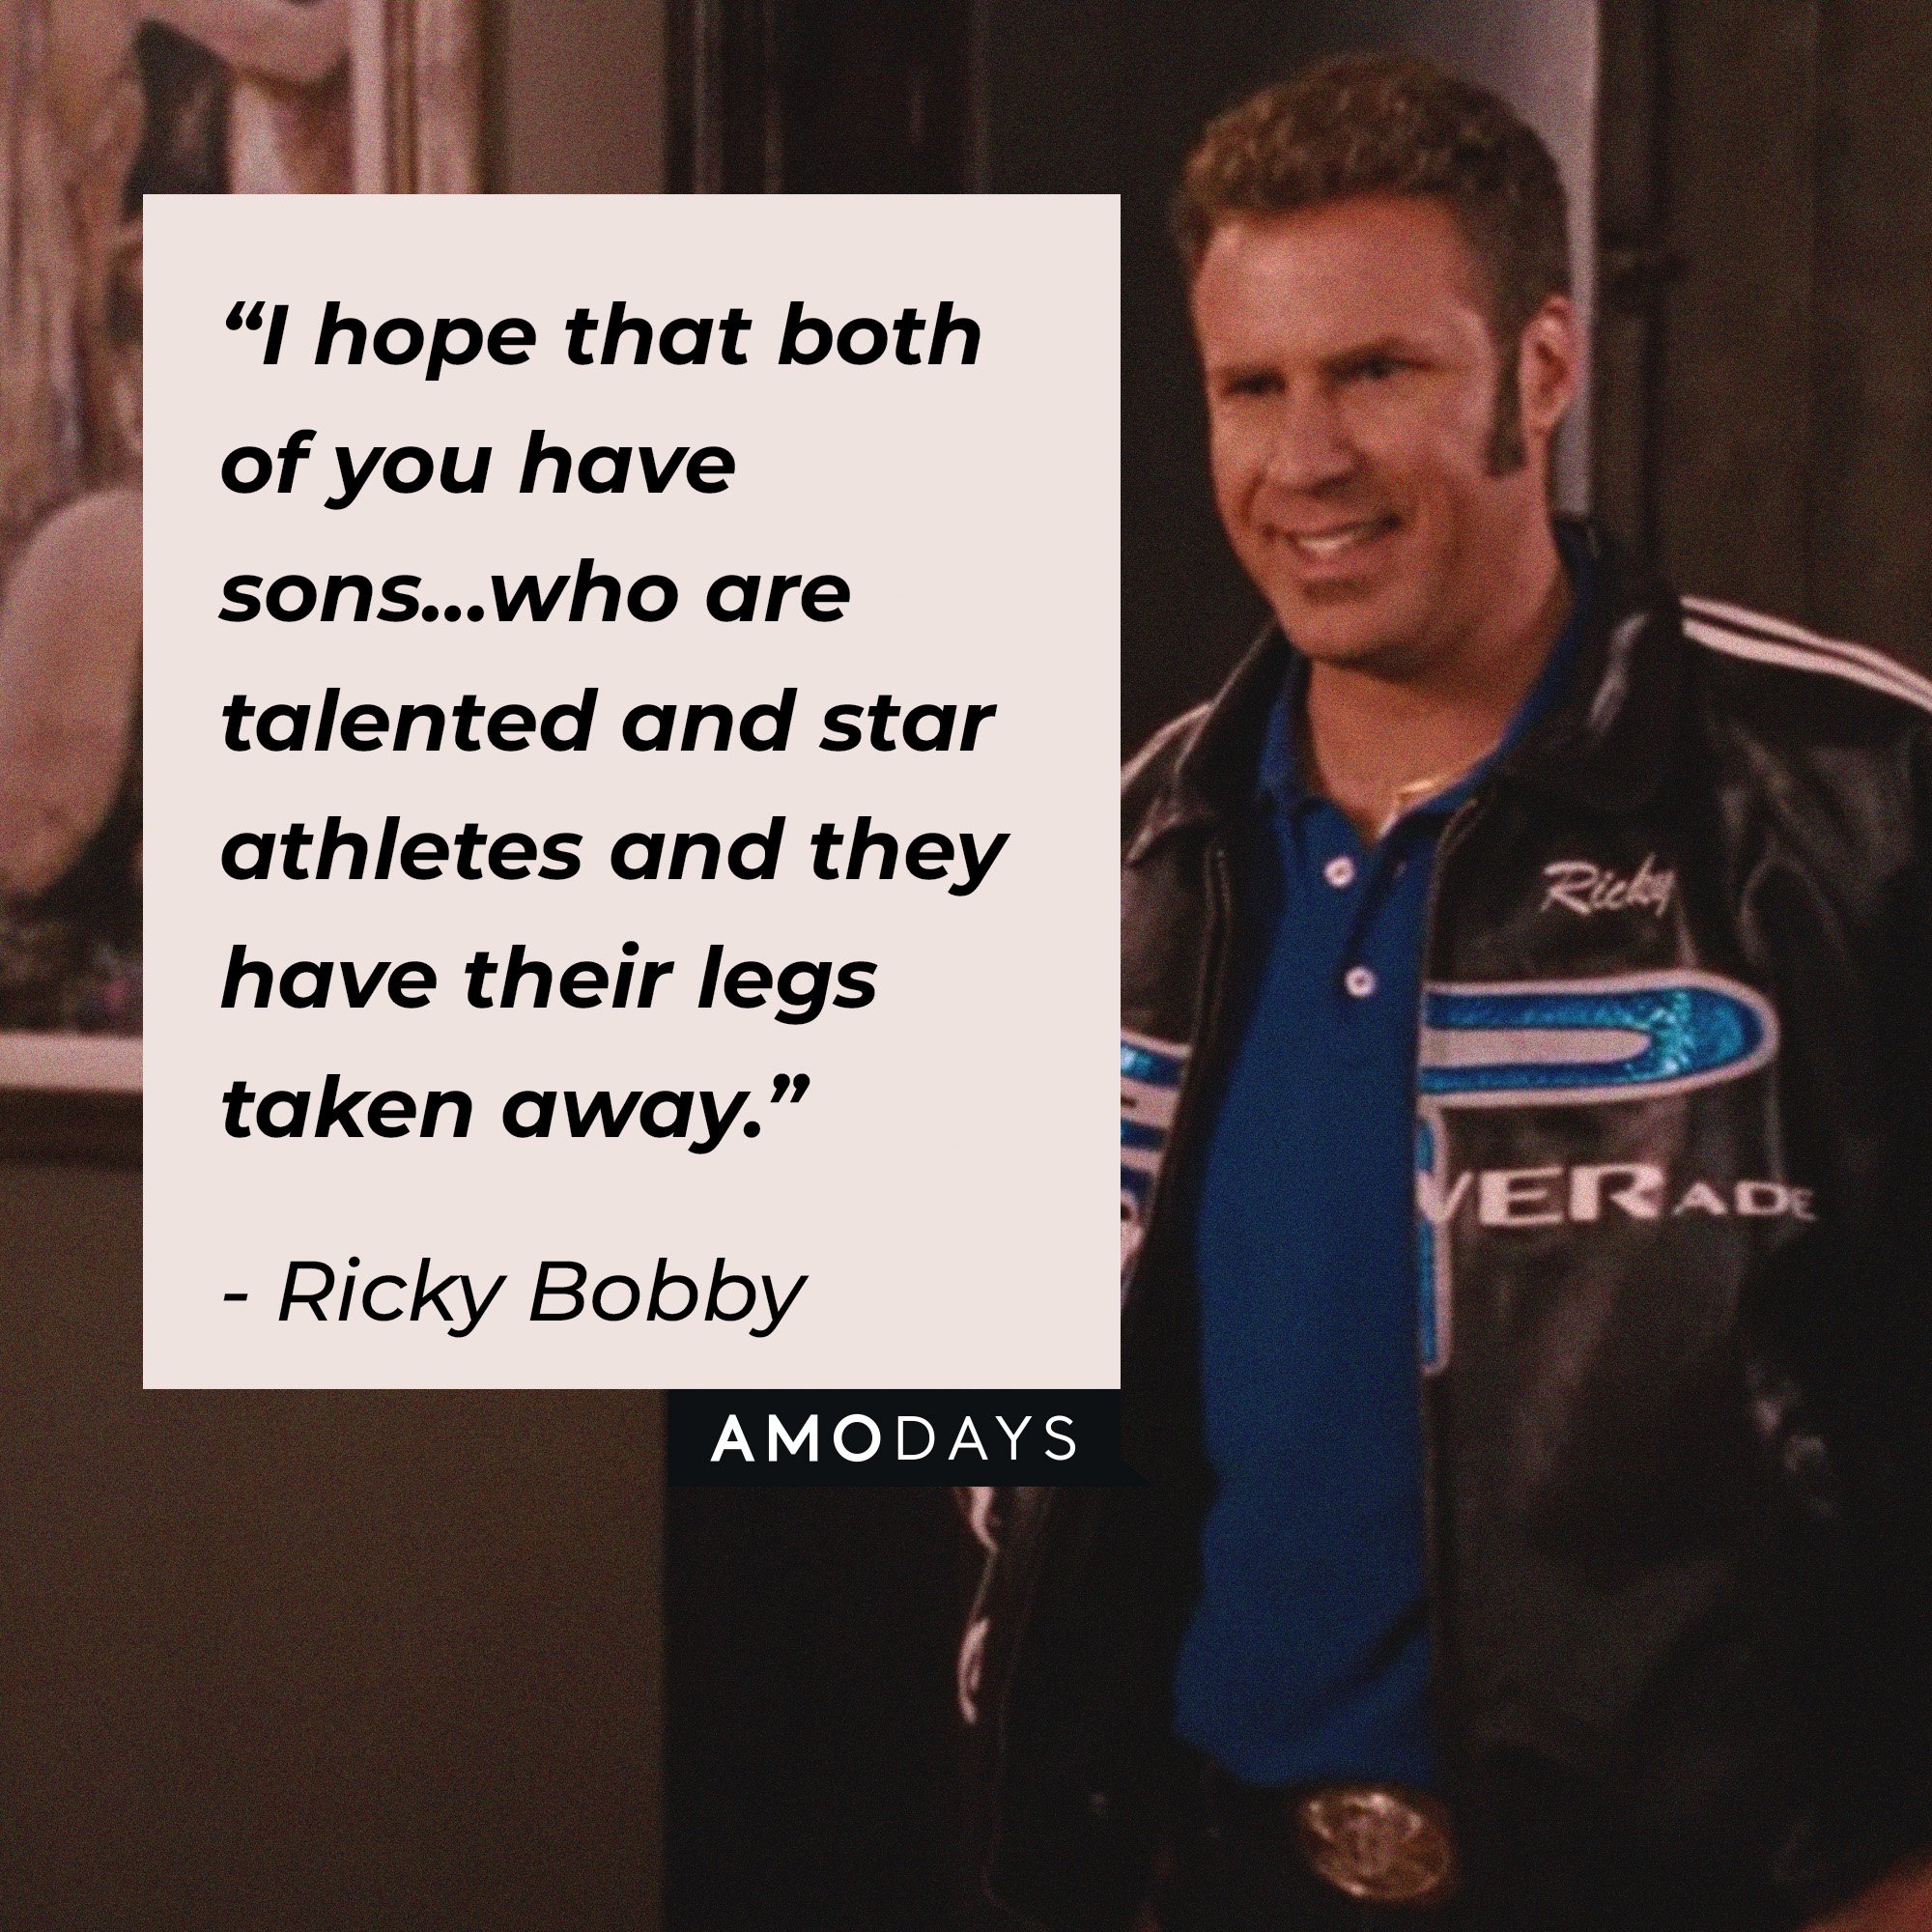 Ricky Bobby’s quote:  “I hope that both of you have sons…who are talented and star athletes and they have their legs taken away.” | Image: AmoDays